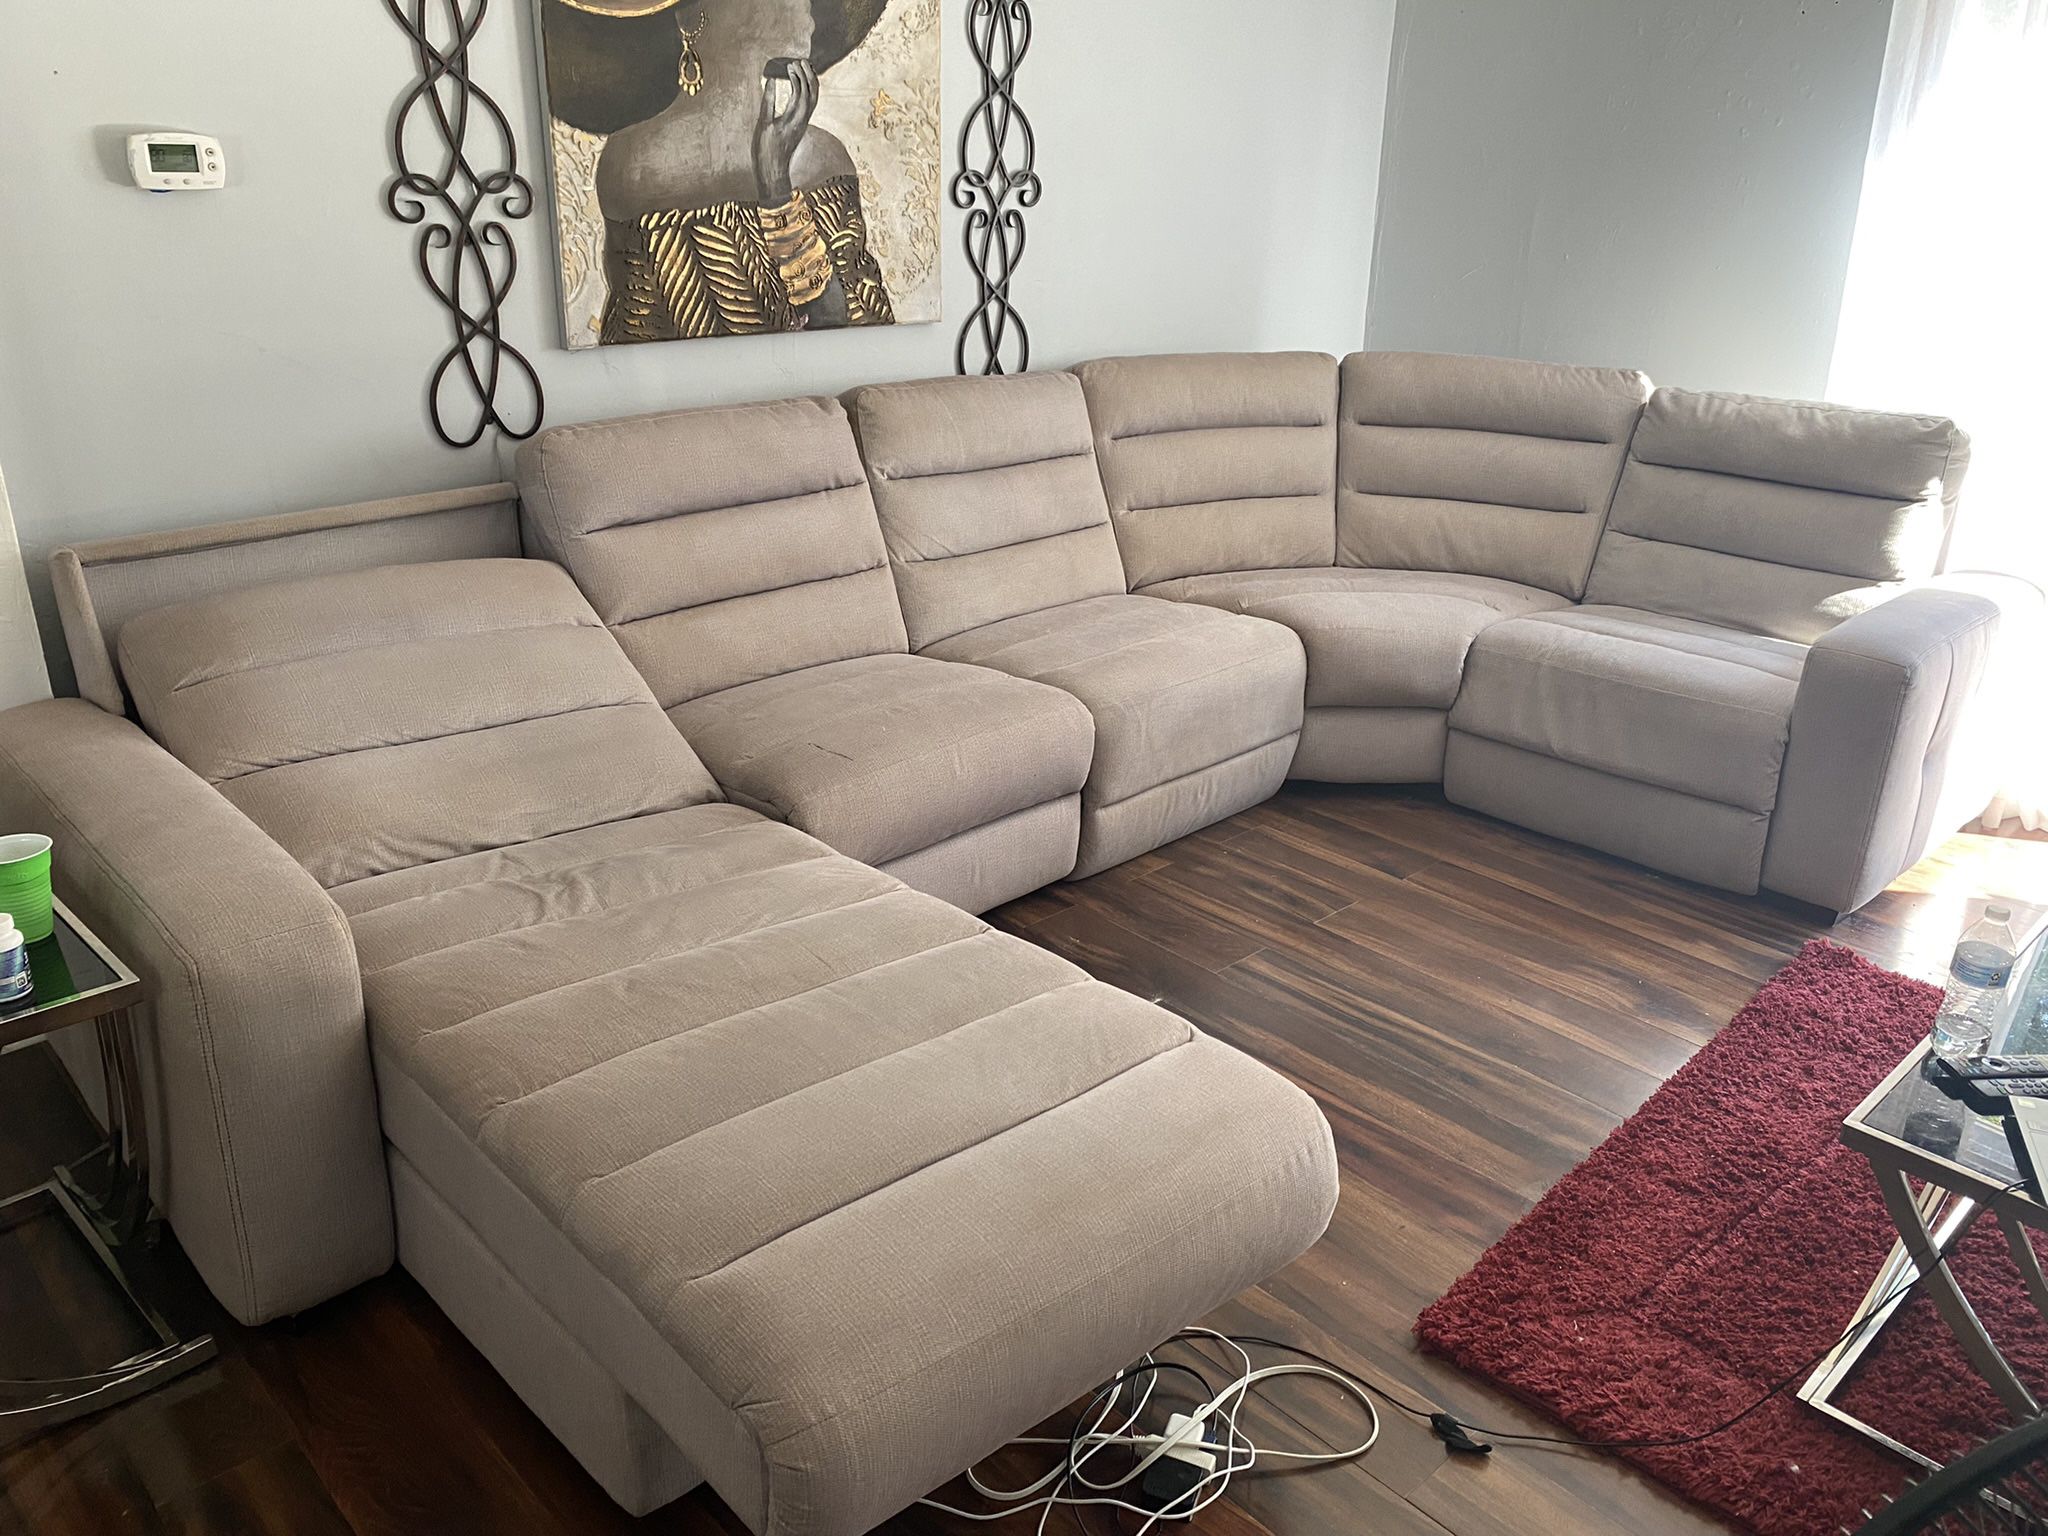 6 Piece Tan Sectional Couch